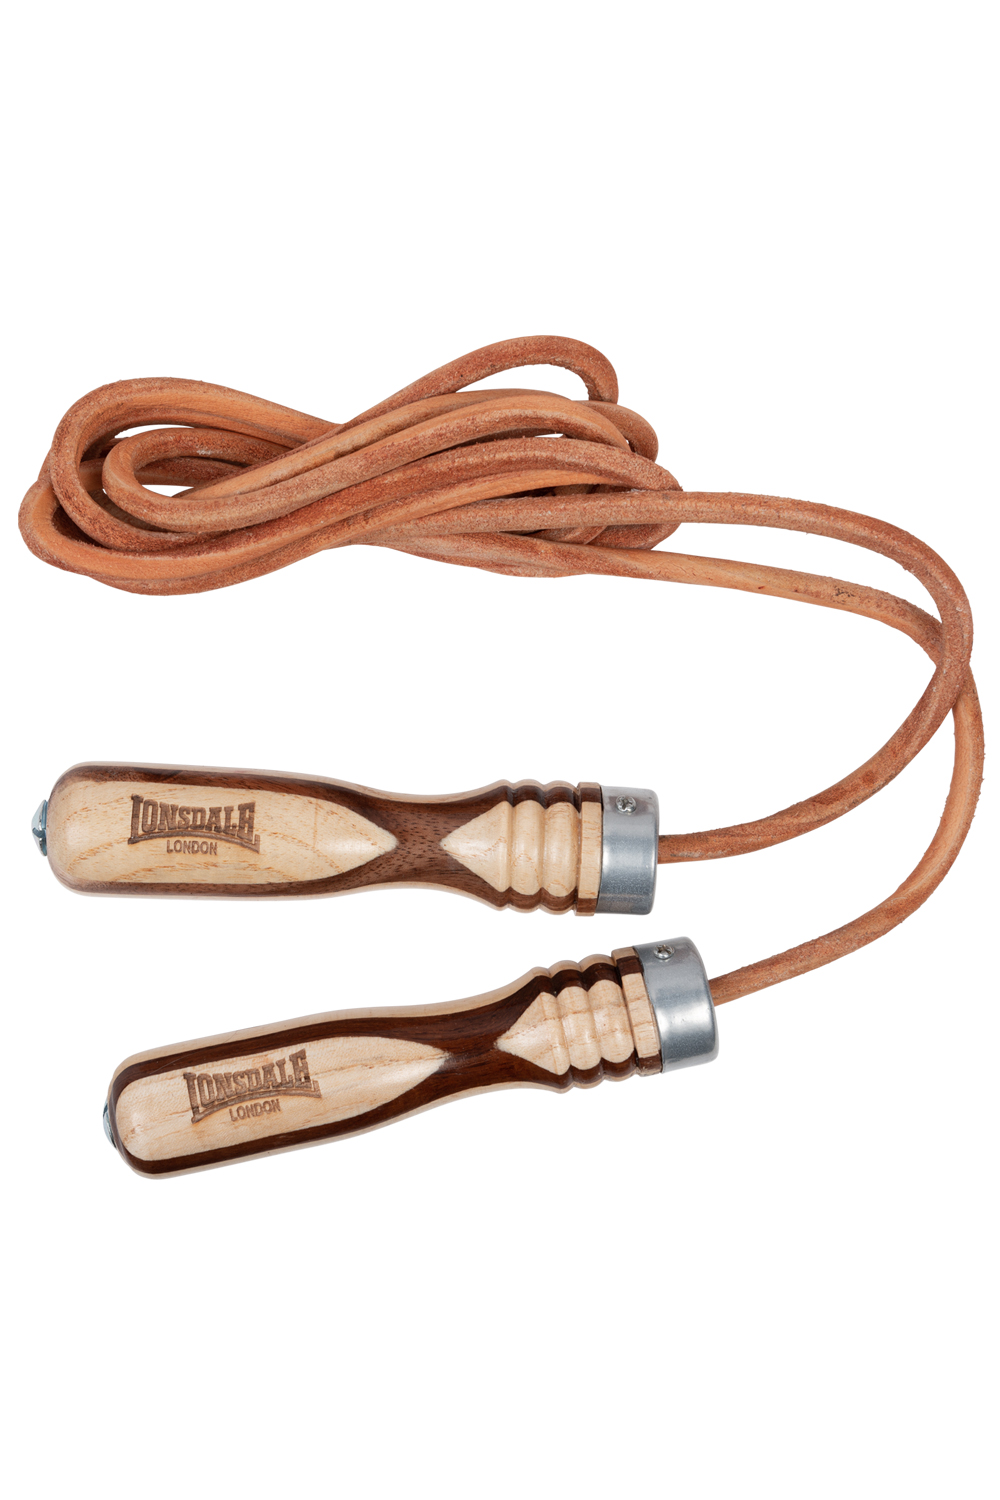 Lonsdale Skipping rope 2,8m